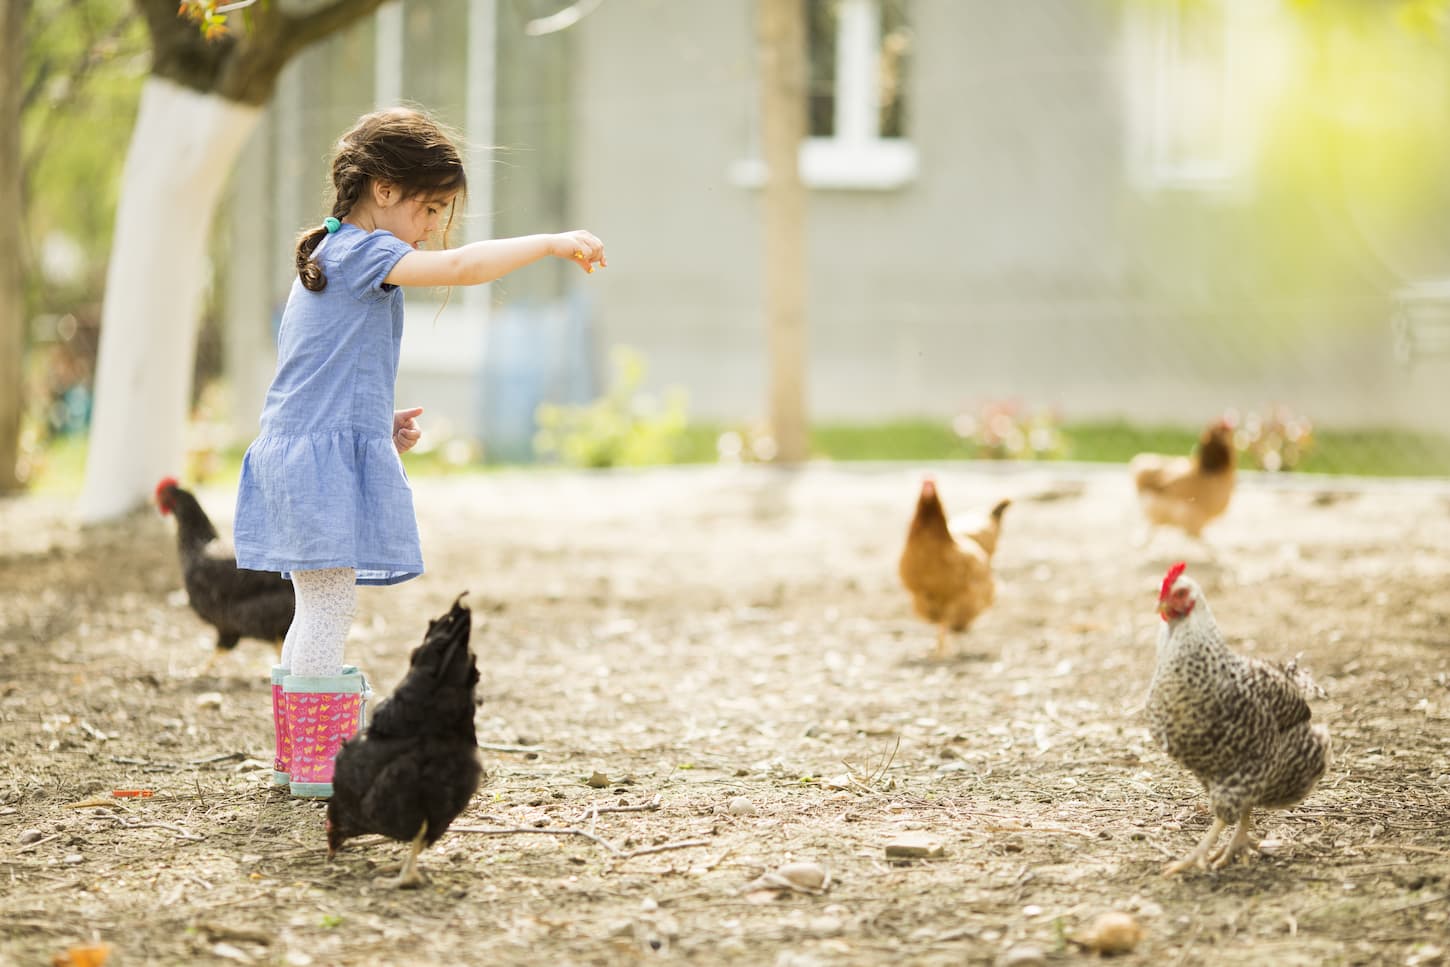 An image of a little girl feeding chickens.